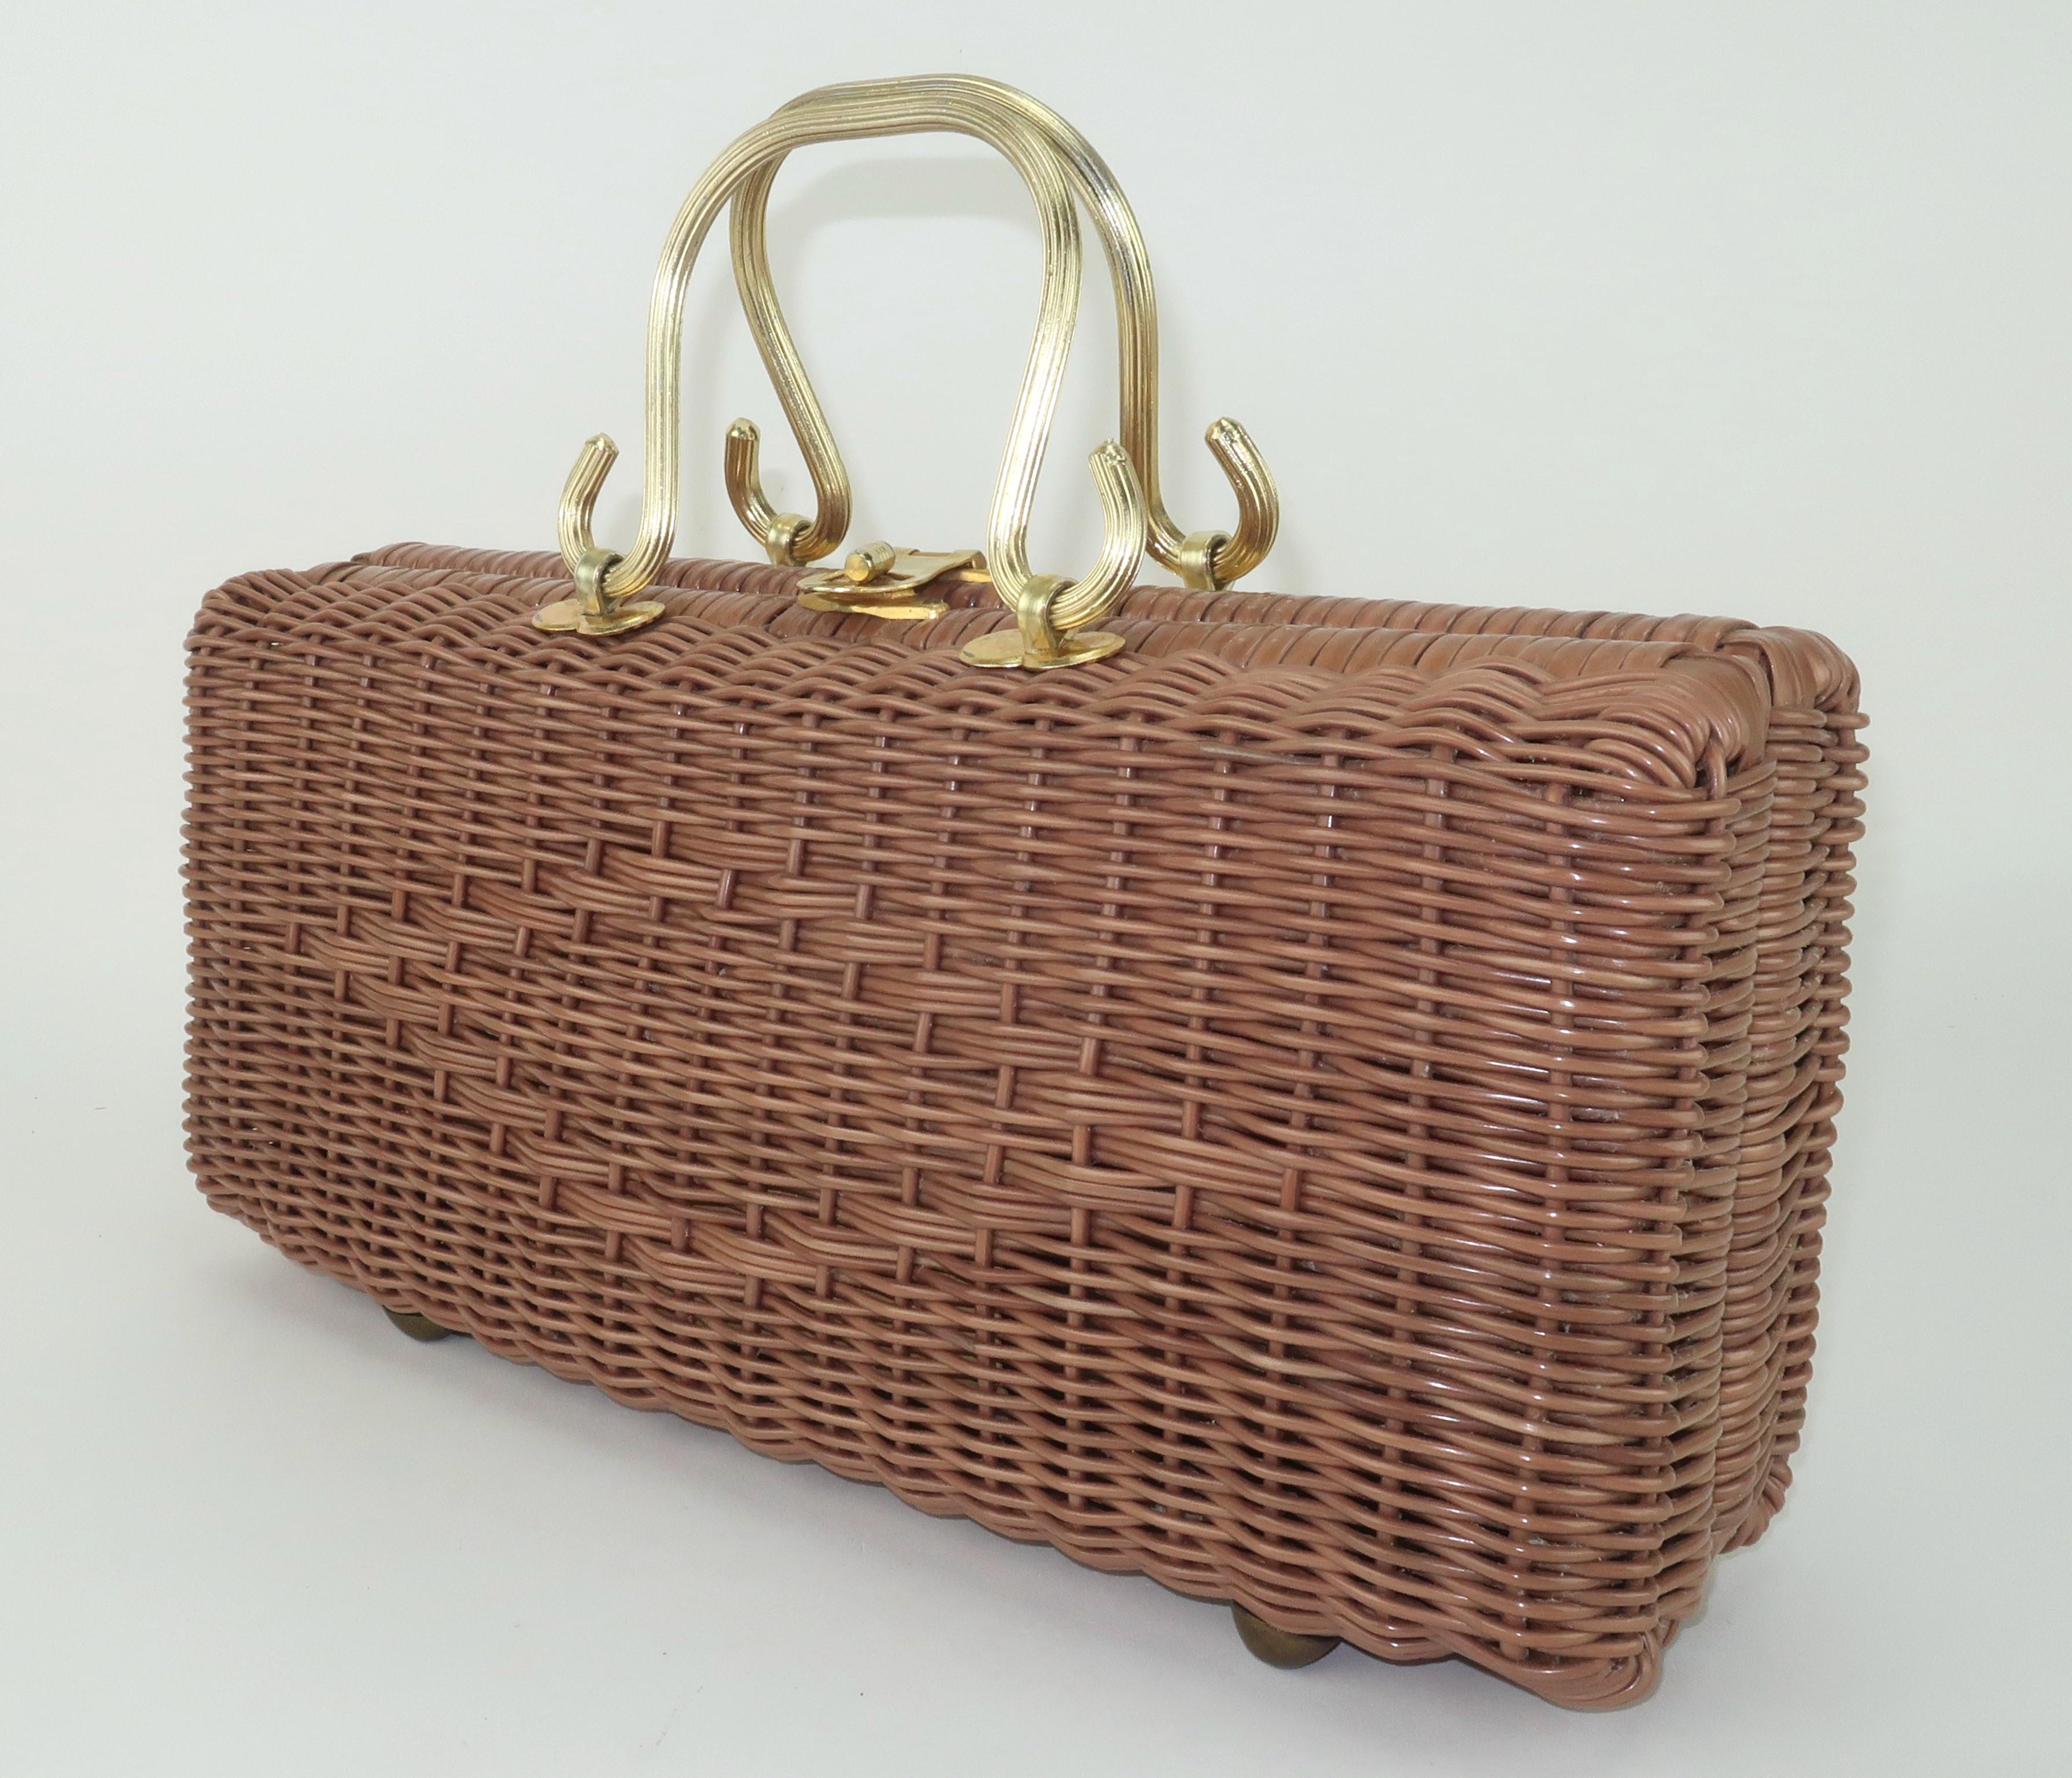 Women's Elongated Straw Handbag With Gold Handles, 1960's For Sale